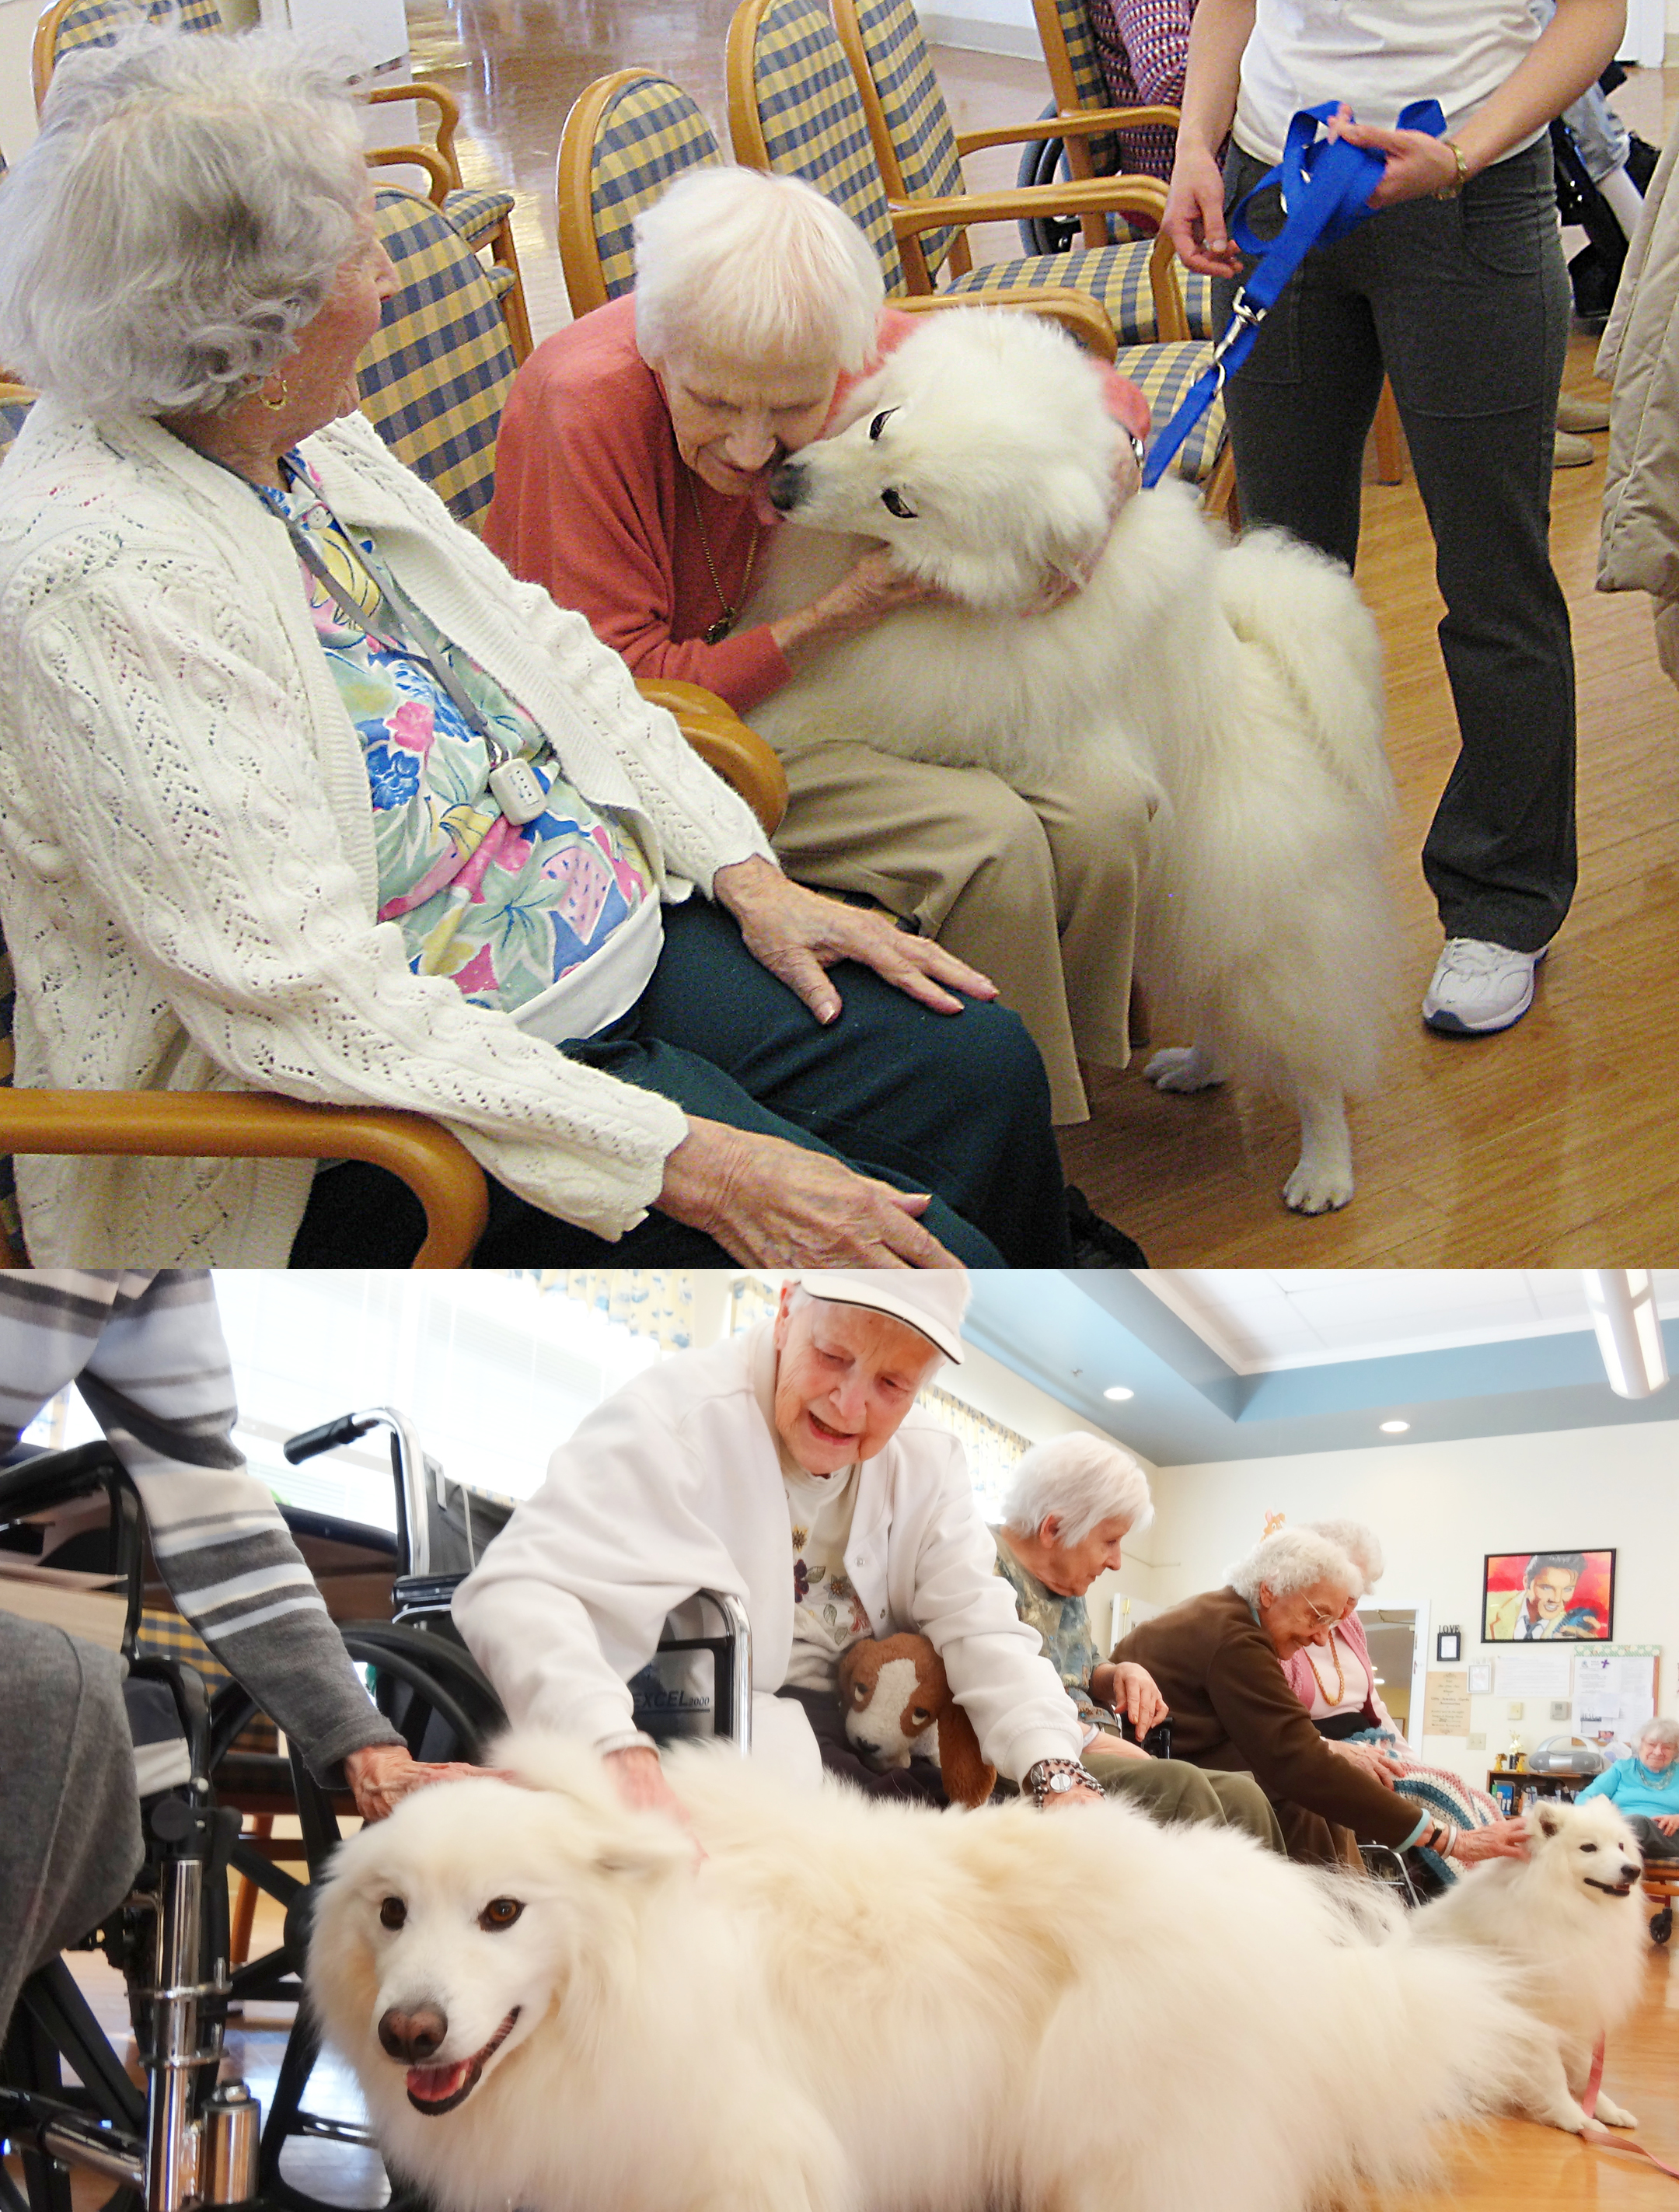 Some much appreciated therapy dog visits at a nursing home.